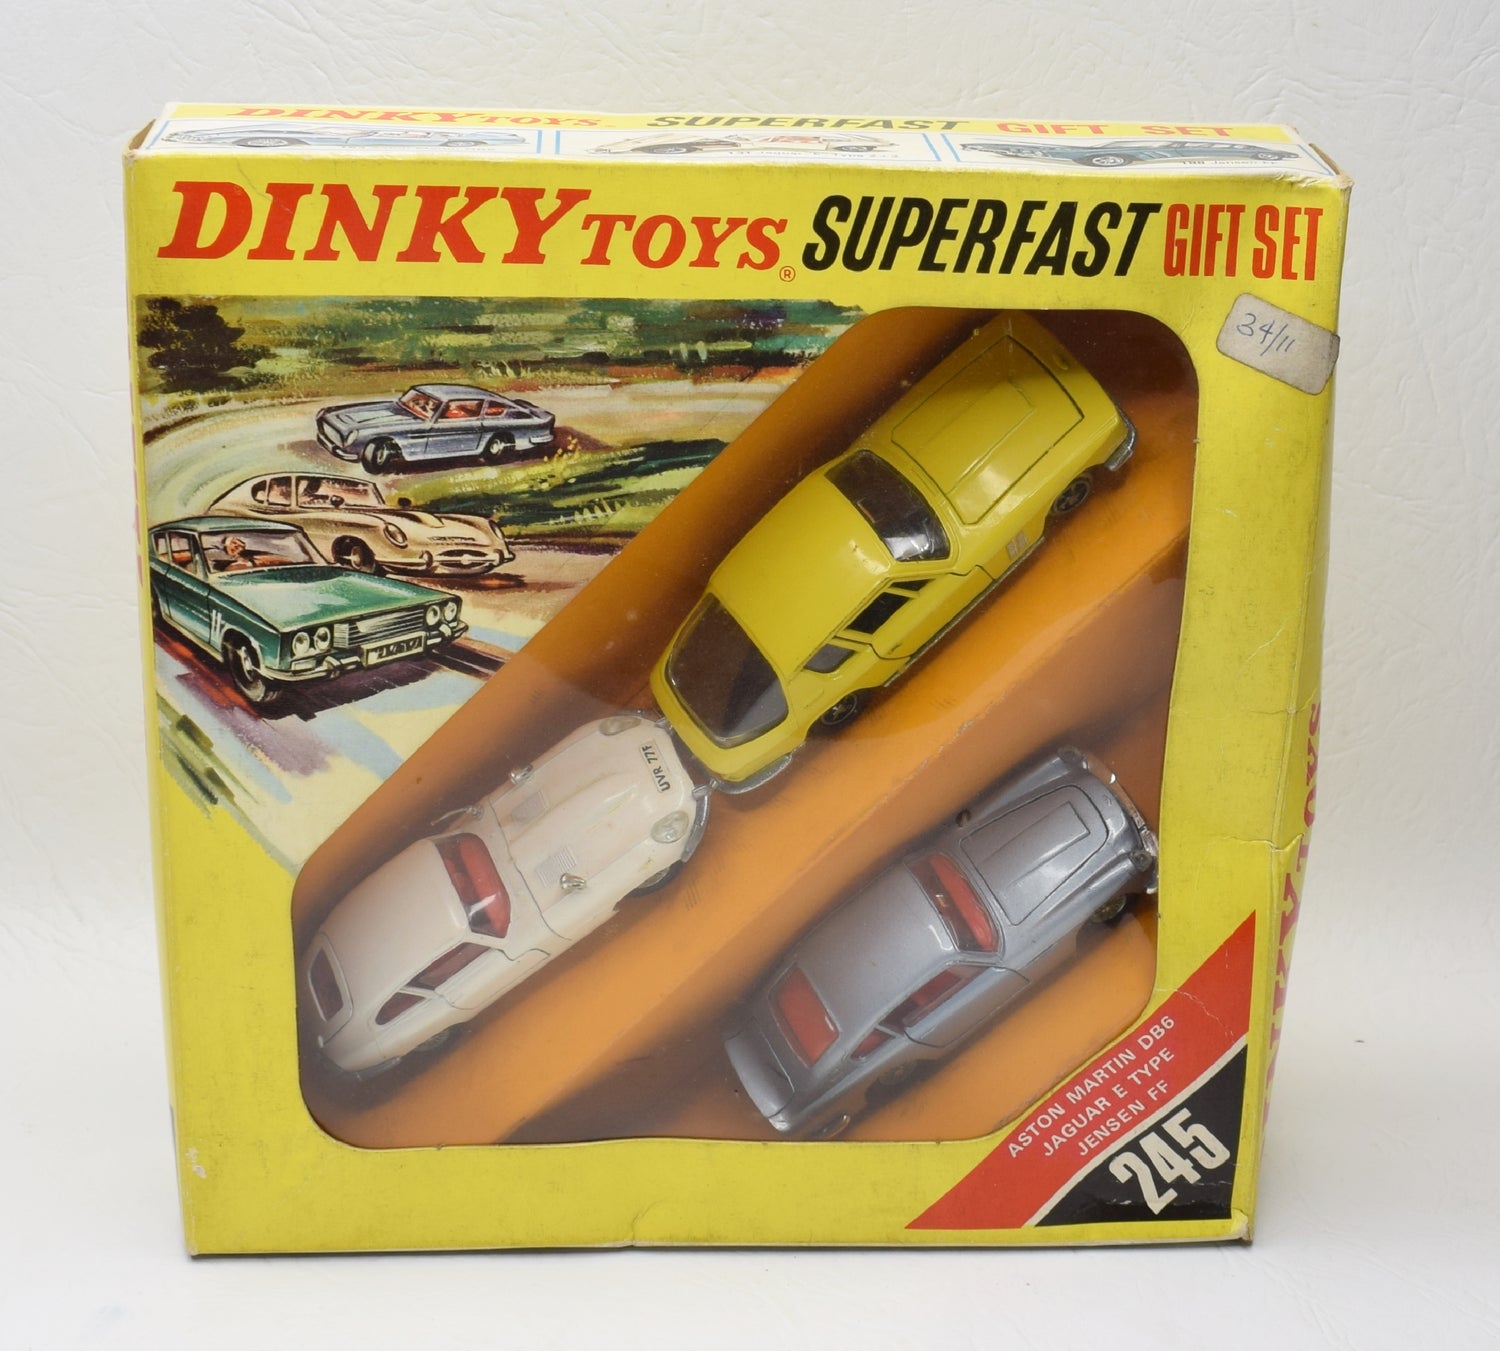 Dinky toys 245 Superfast Gift set Very Near Mint/Boxed